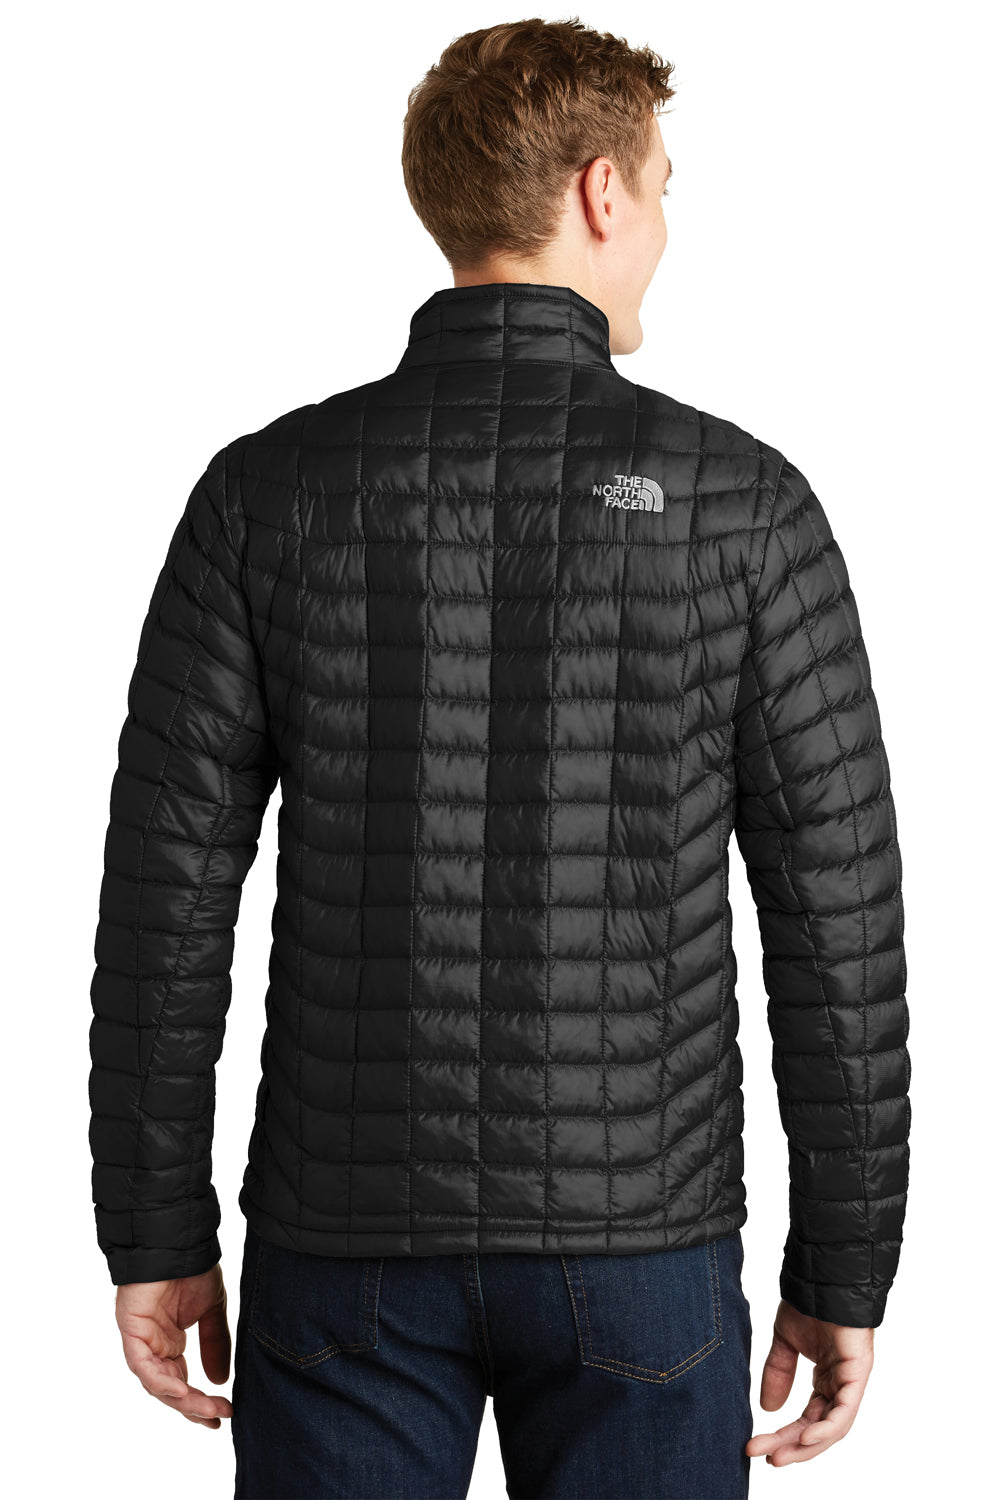 The North Face NF0A3LH2 Mens ThermoBall Trekker Water Resistant Full Zip Jacket Black Back